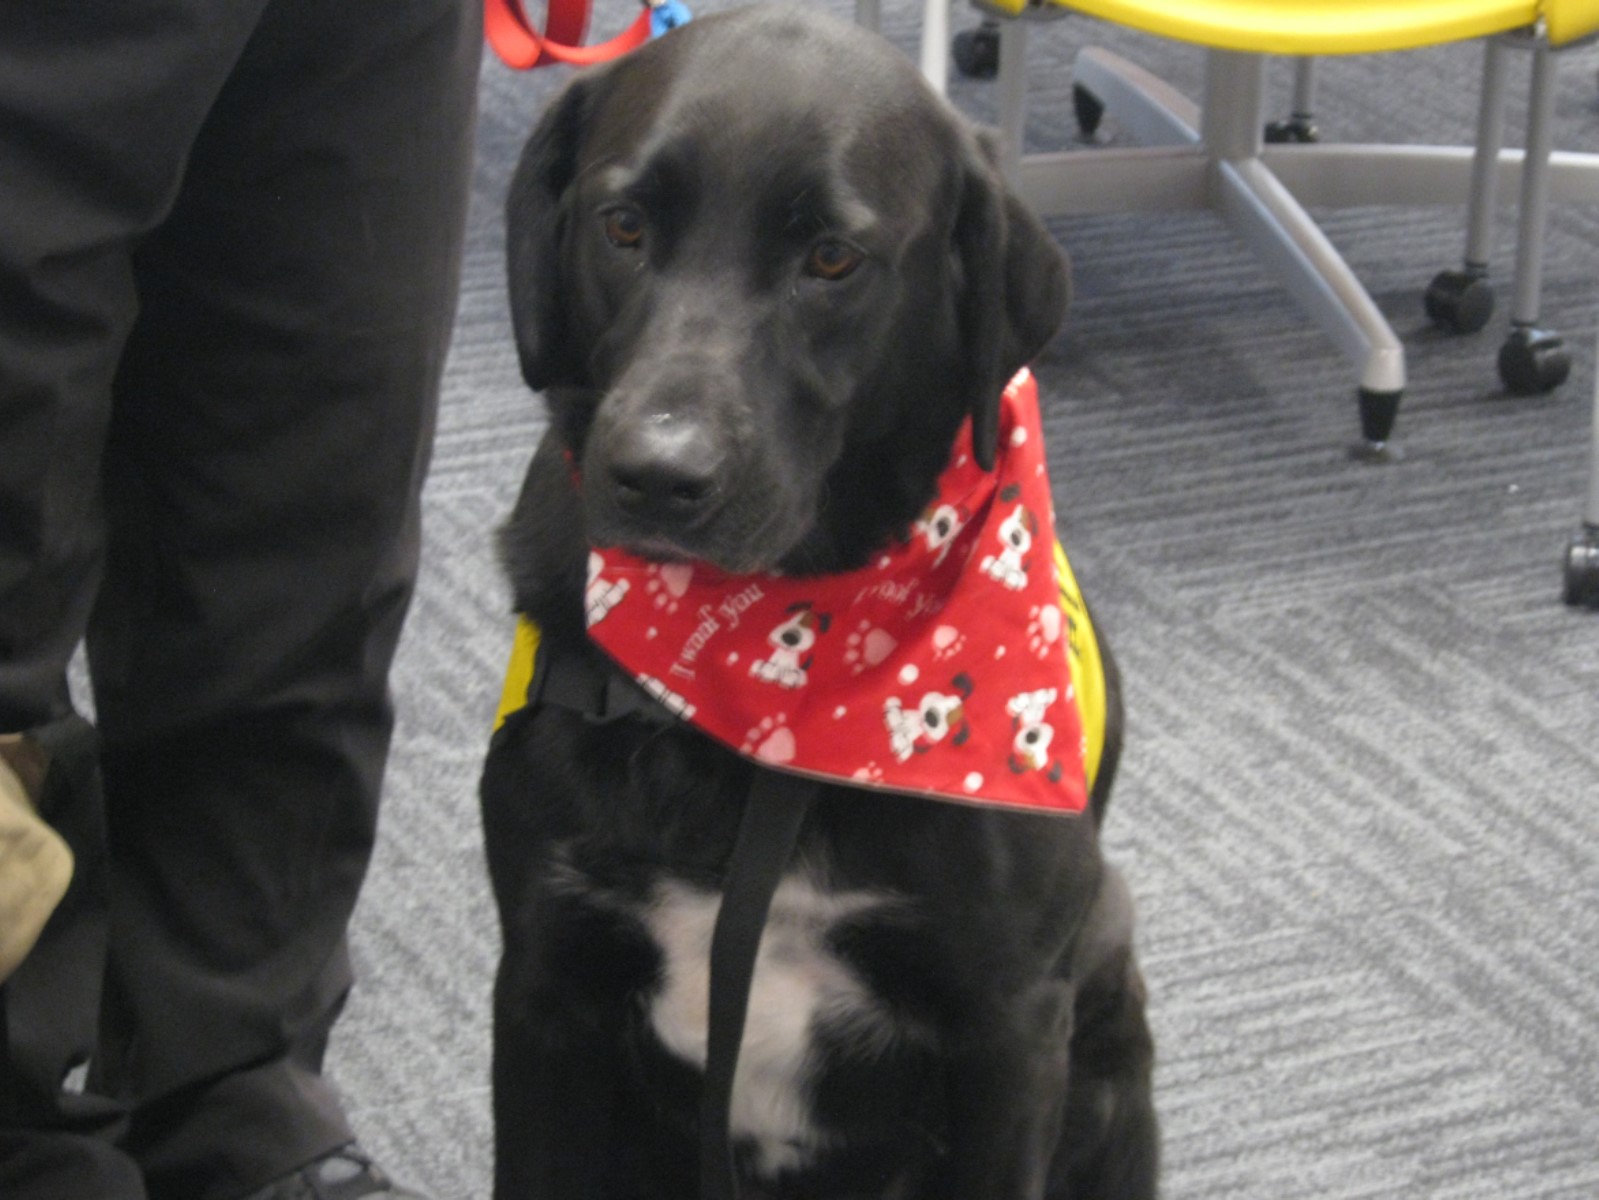 a black dog with a white chest wearing a red bandana